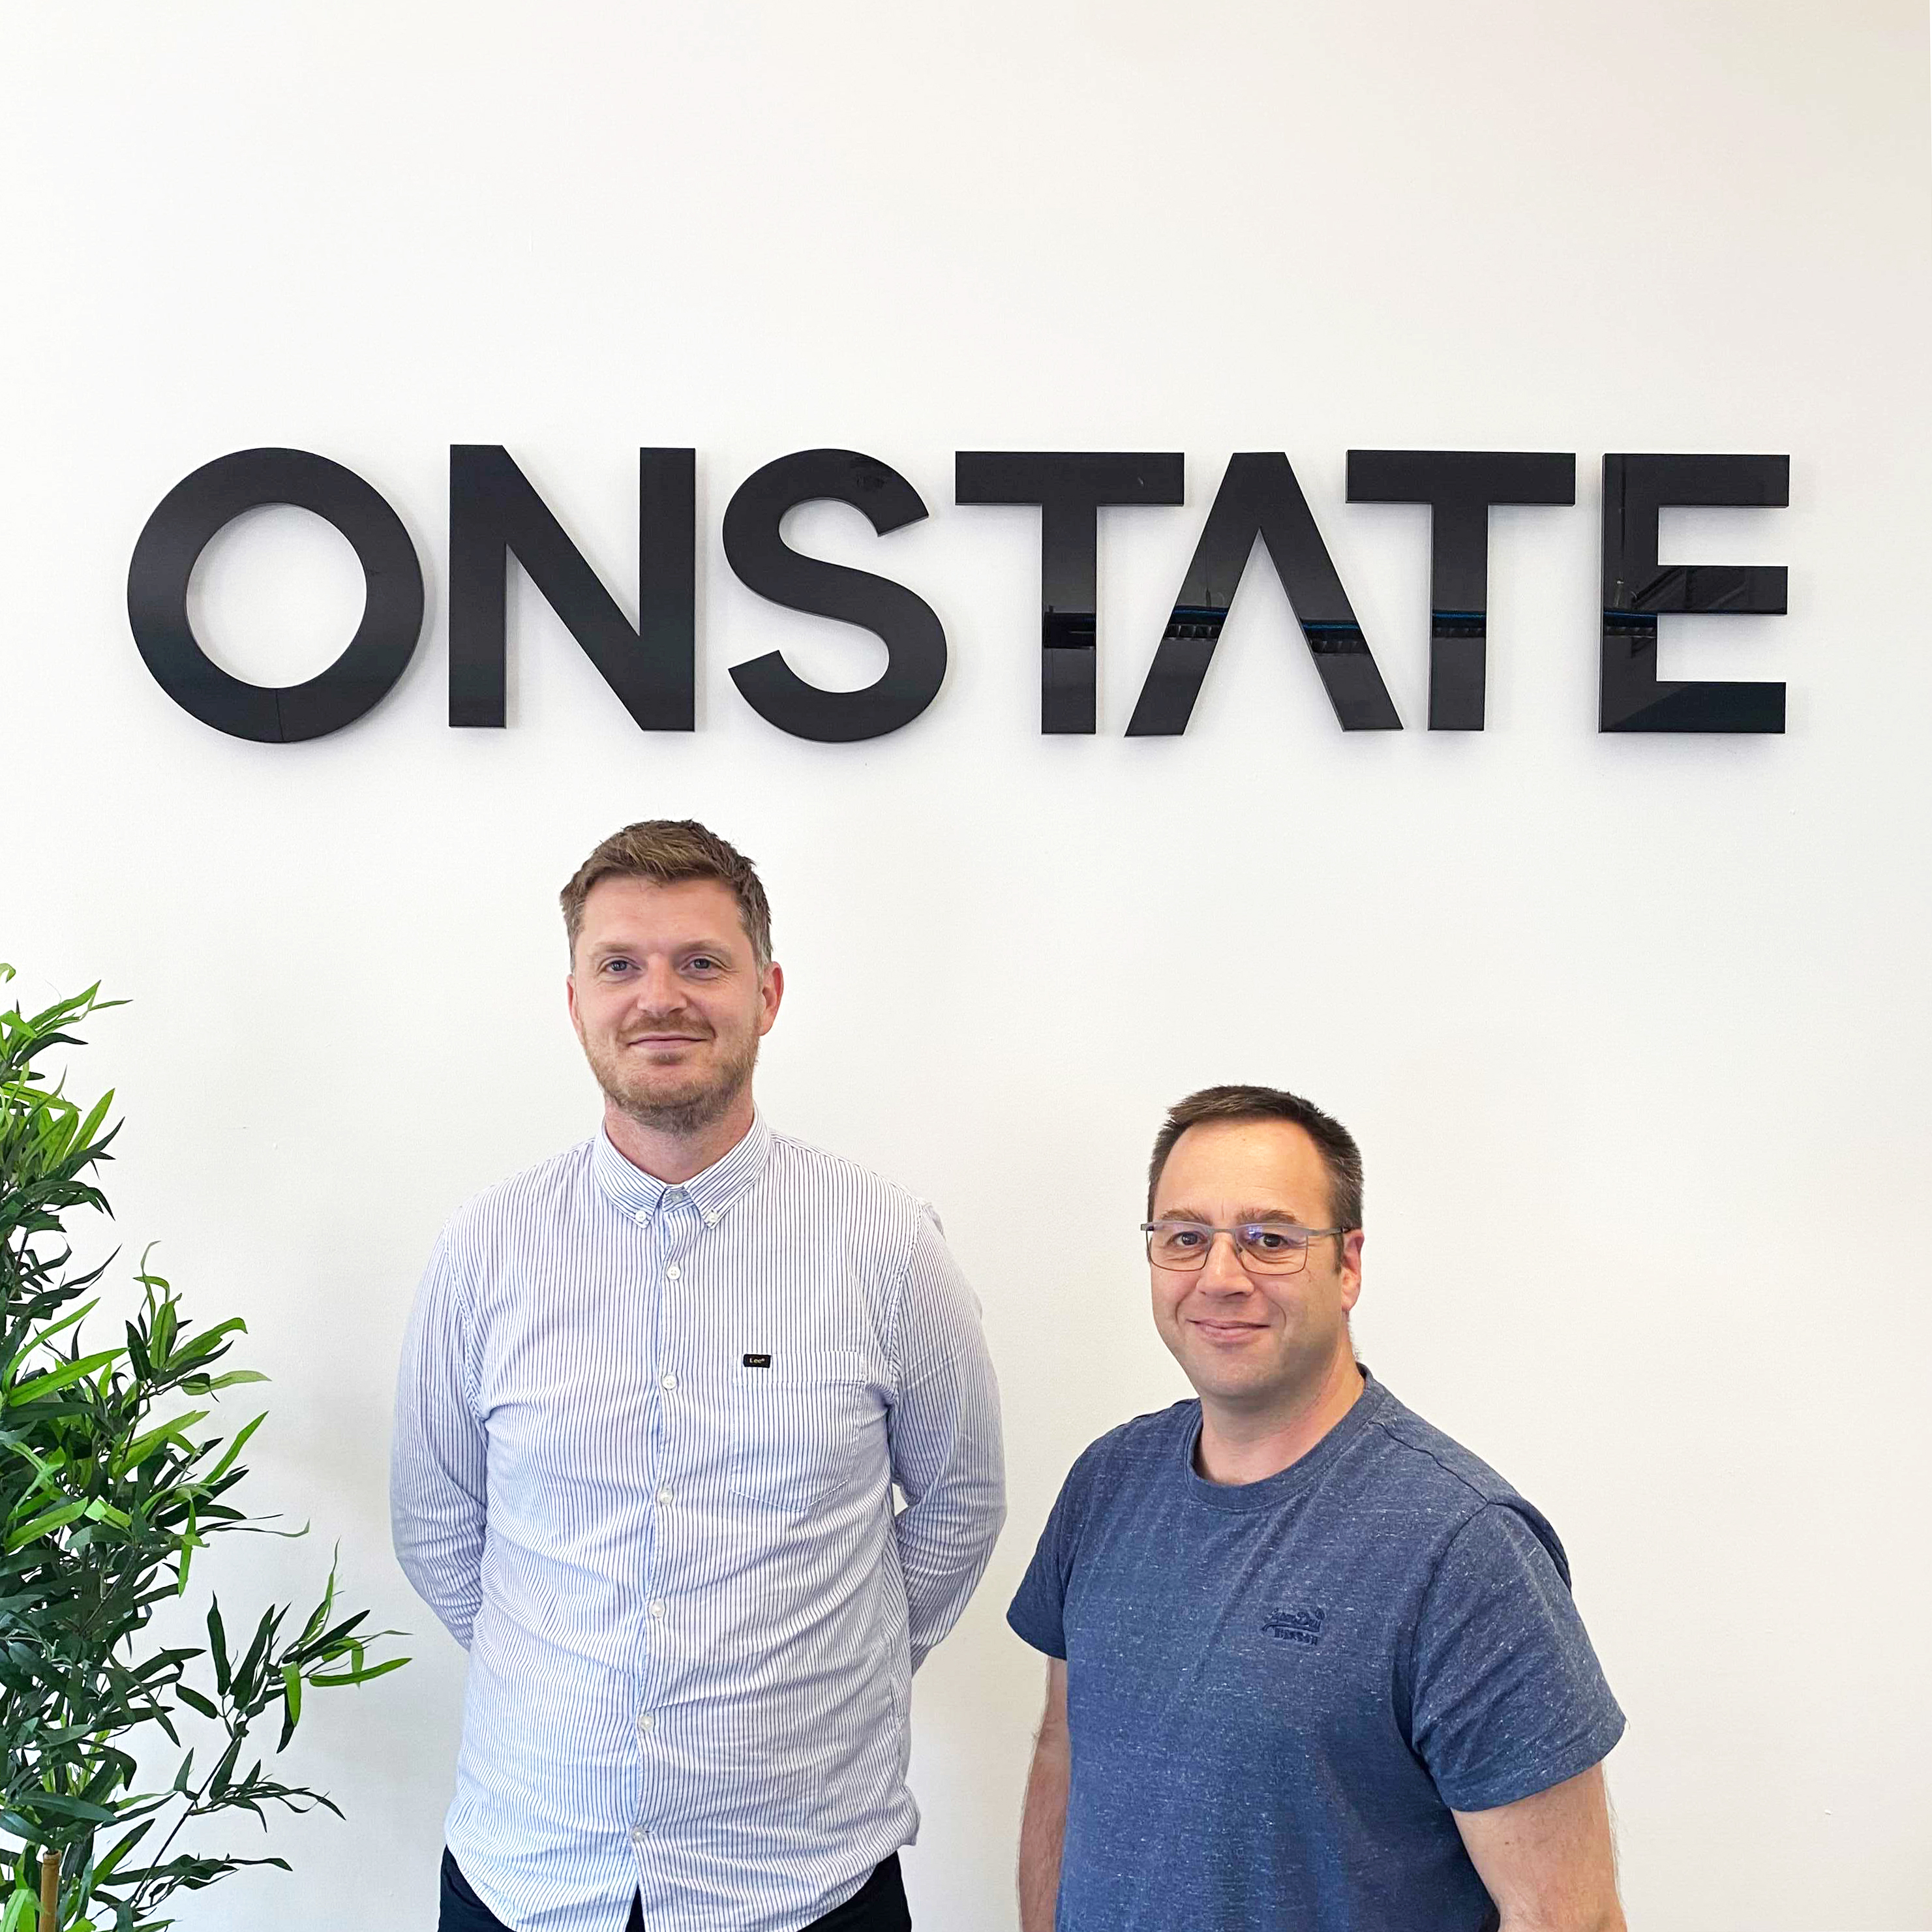 Welcoming New Appointments at Onstate